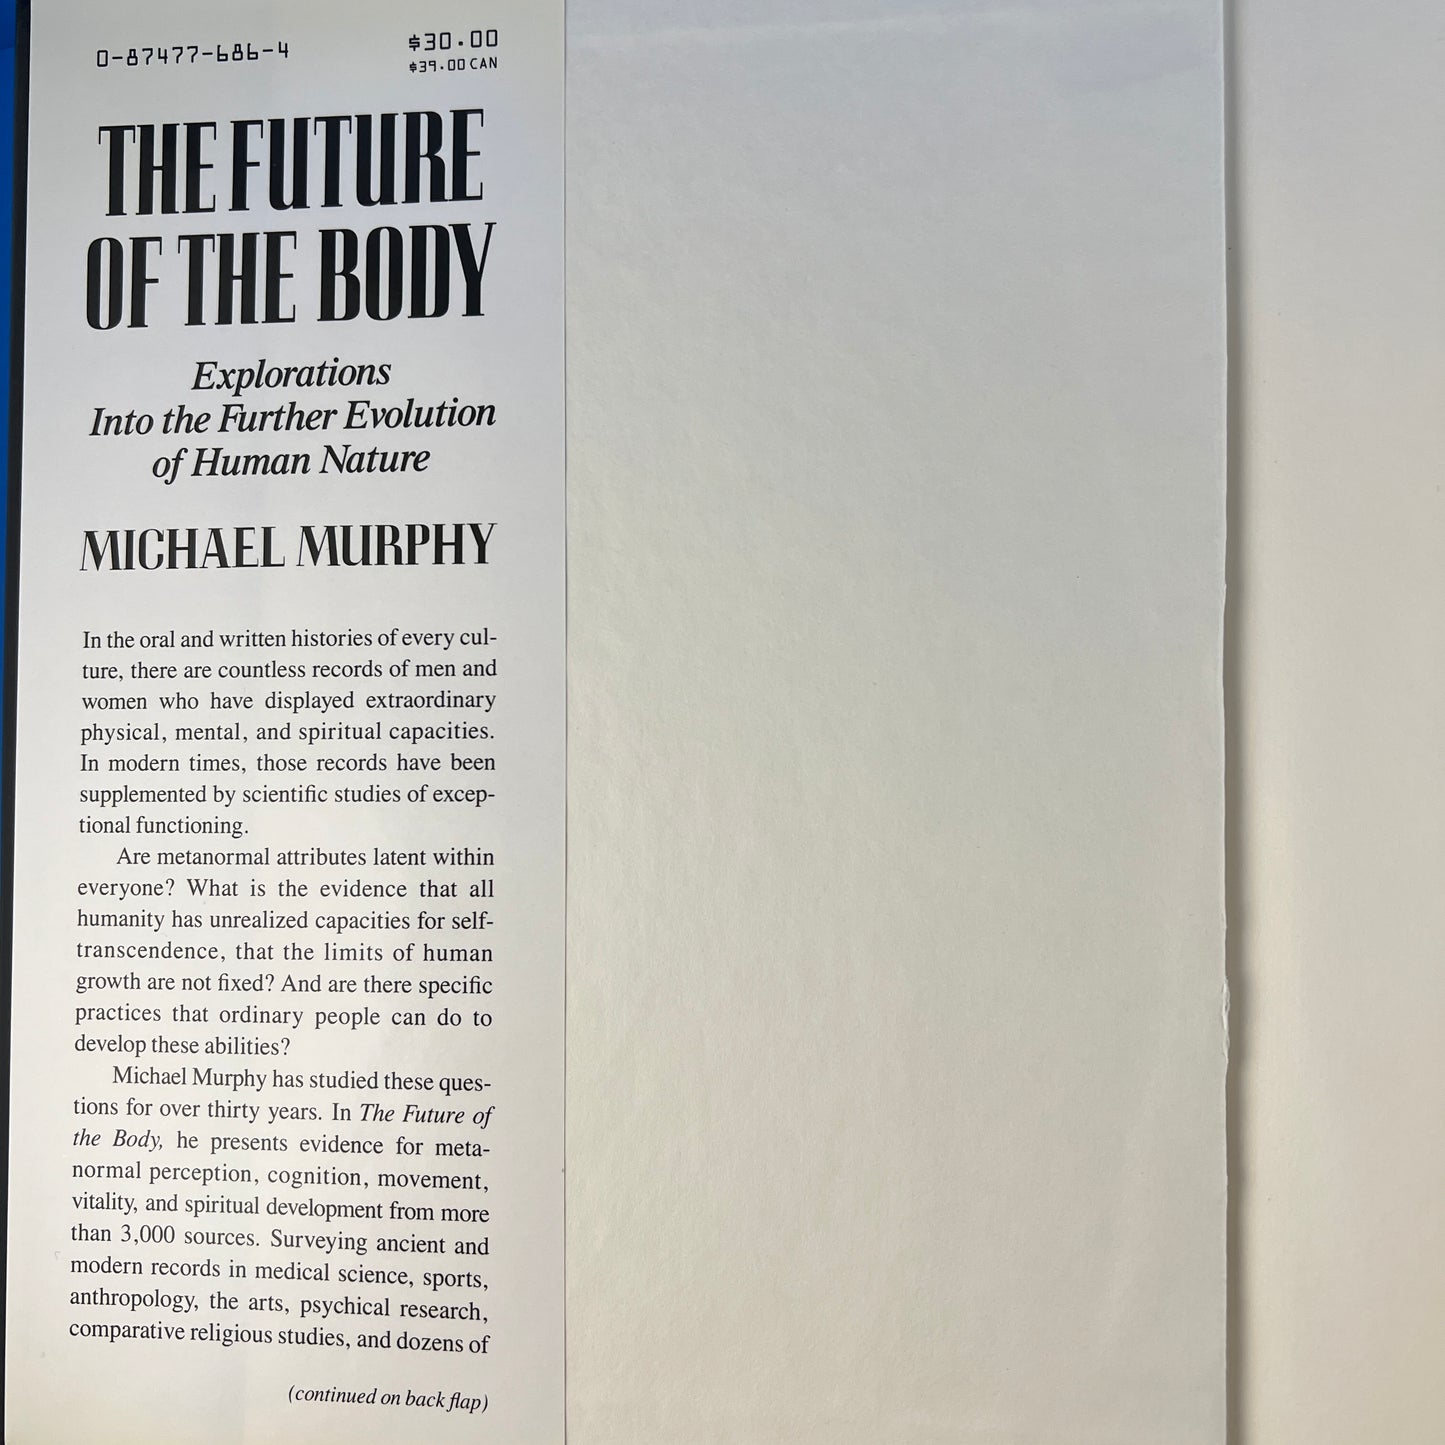 The Future of the Body: Explorations Into the Further Evolution of Human Nature